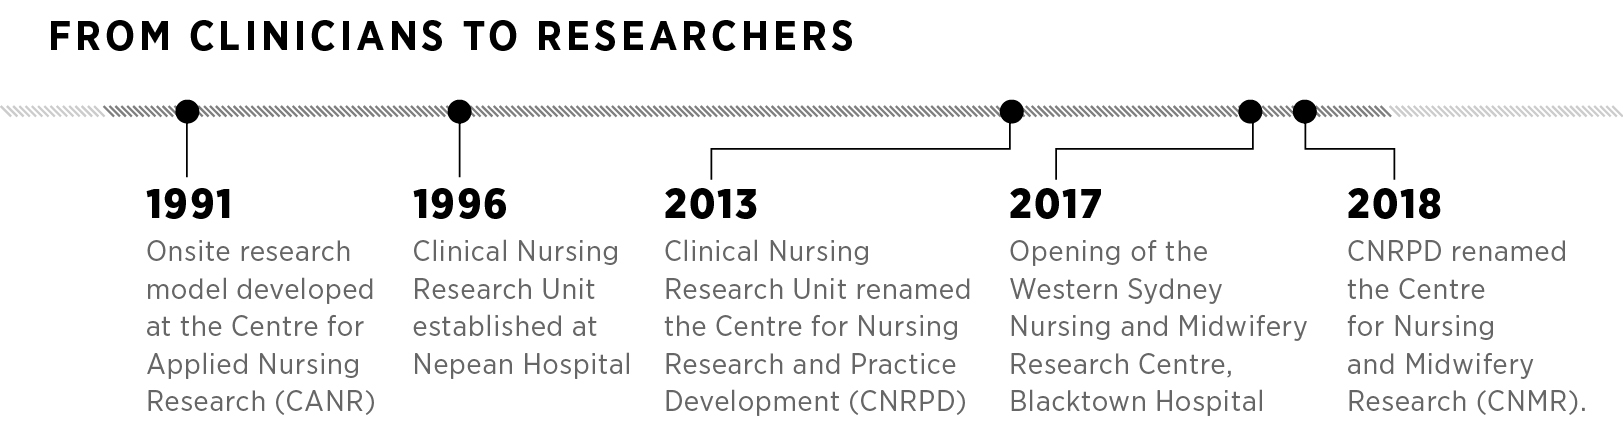 From clinicians to researchers